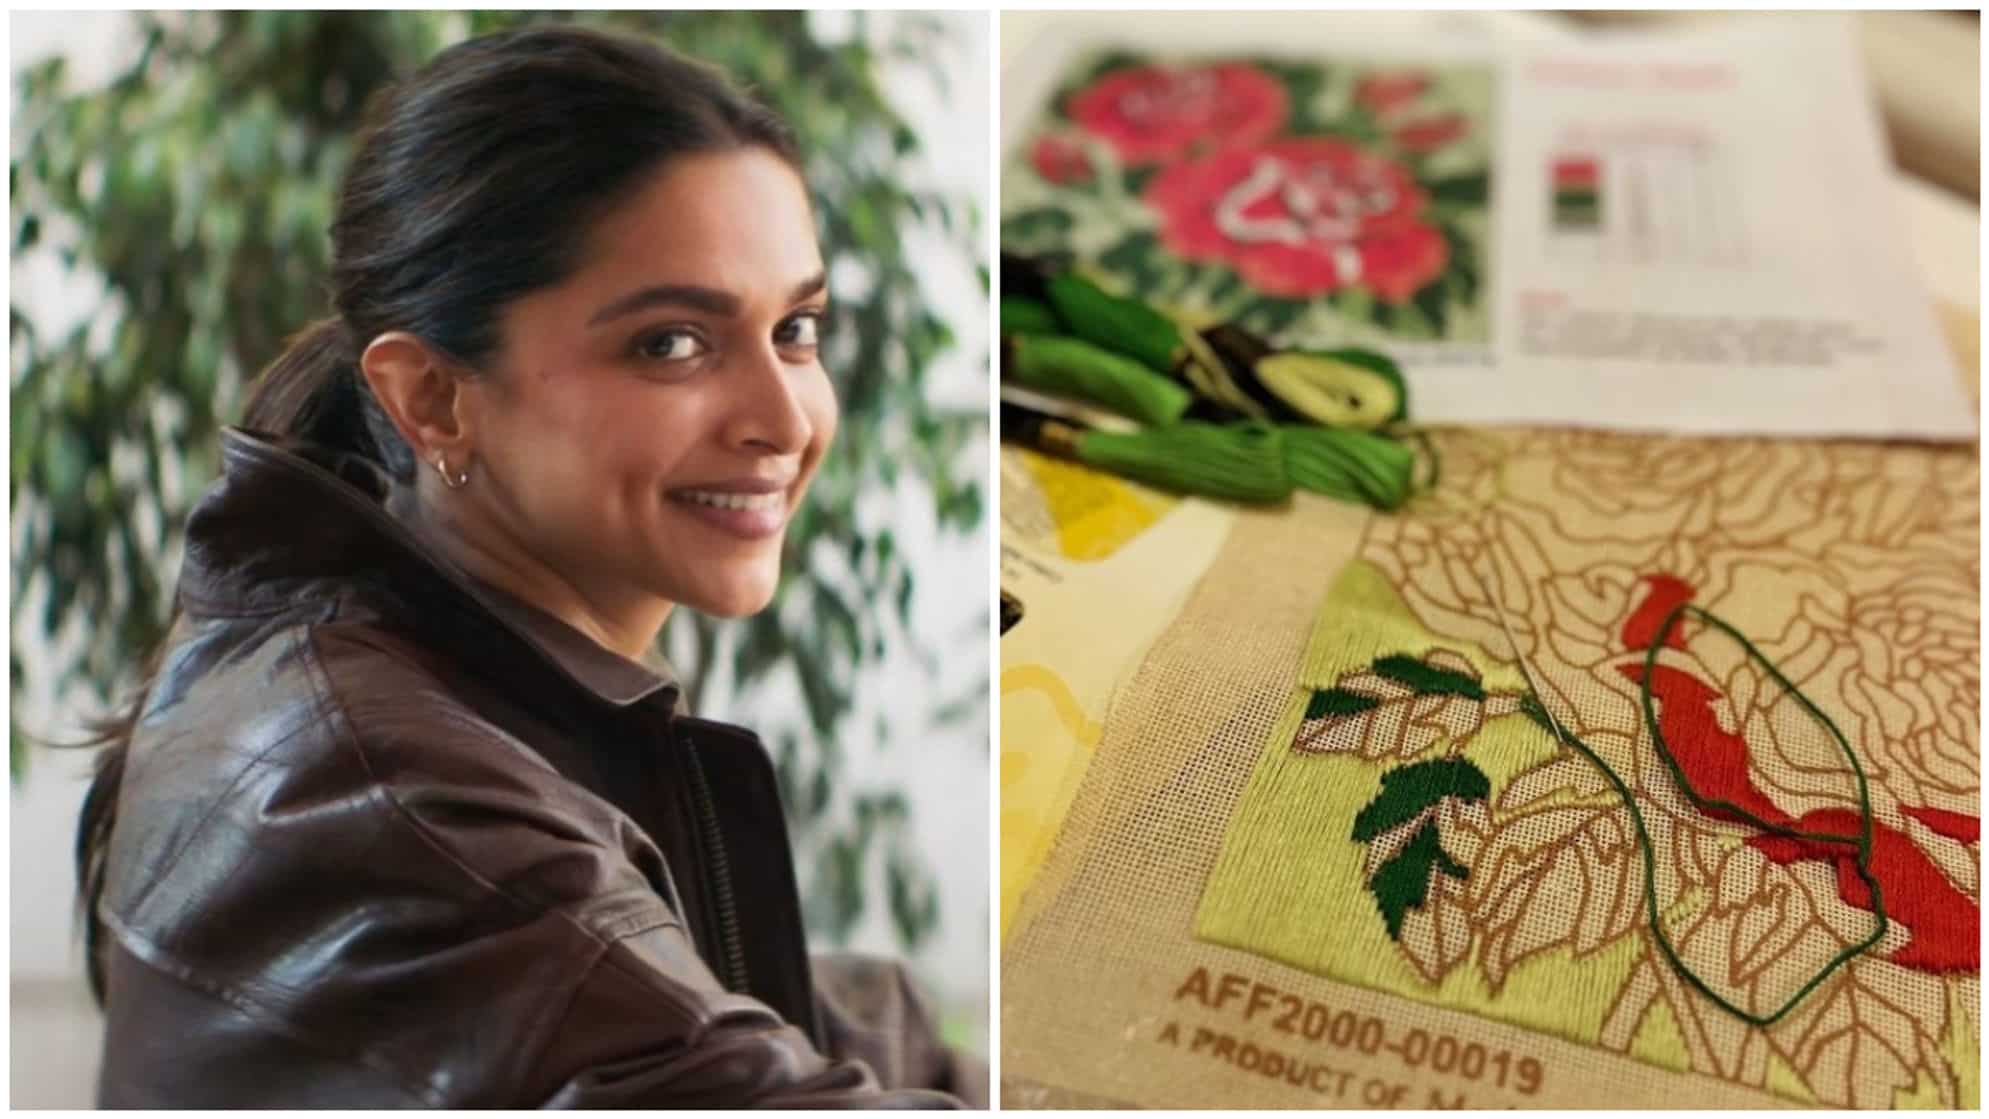 Deepika Padukone tries her hands on embroidery during pregnancy – Fans react with love